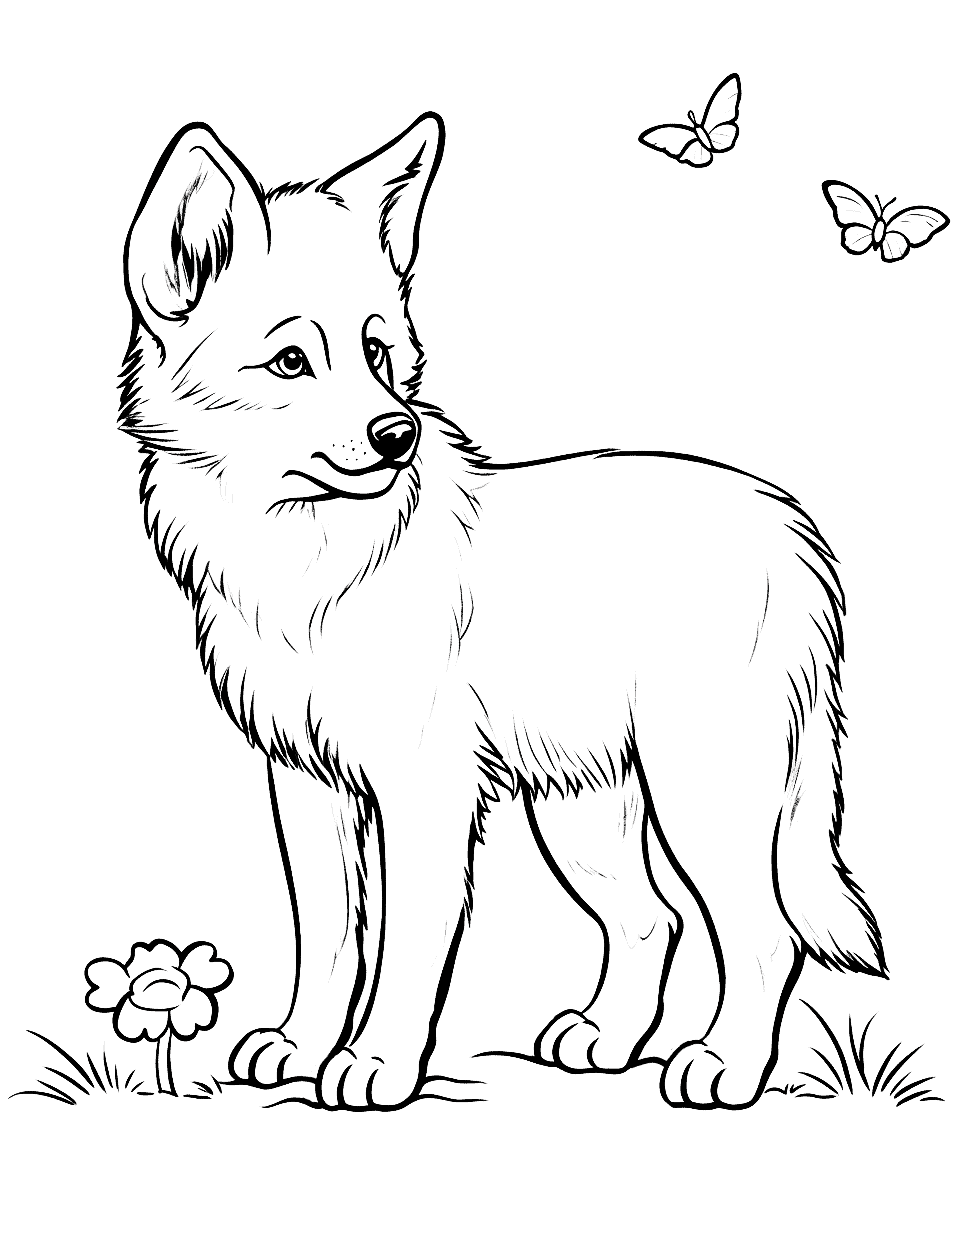 Wolf Pup and Butterfly Coloring Page - A young pup curiously looking at a butterfly.